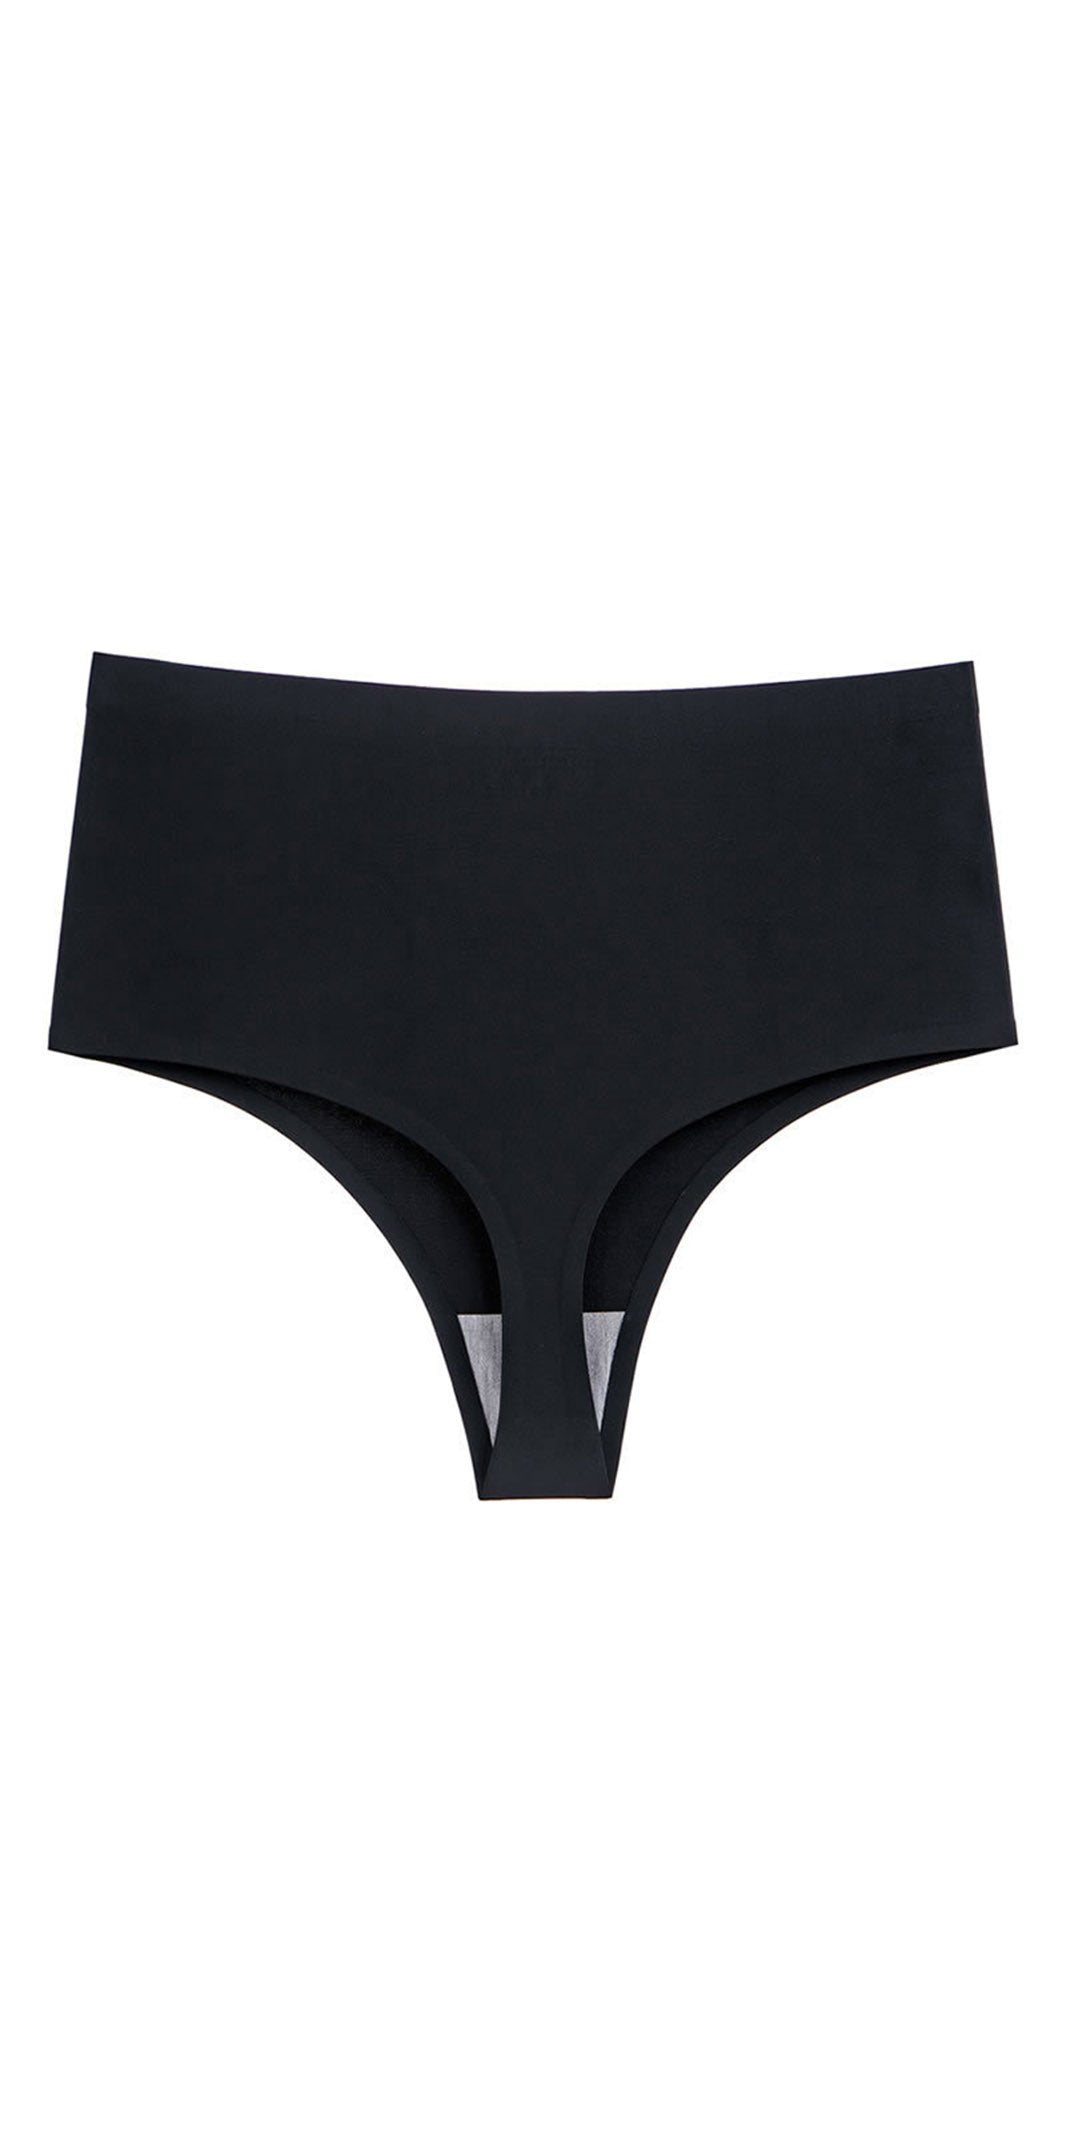 Mid-rise T-shaped Seamless and Simple Design Underwear